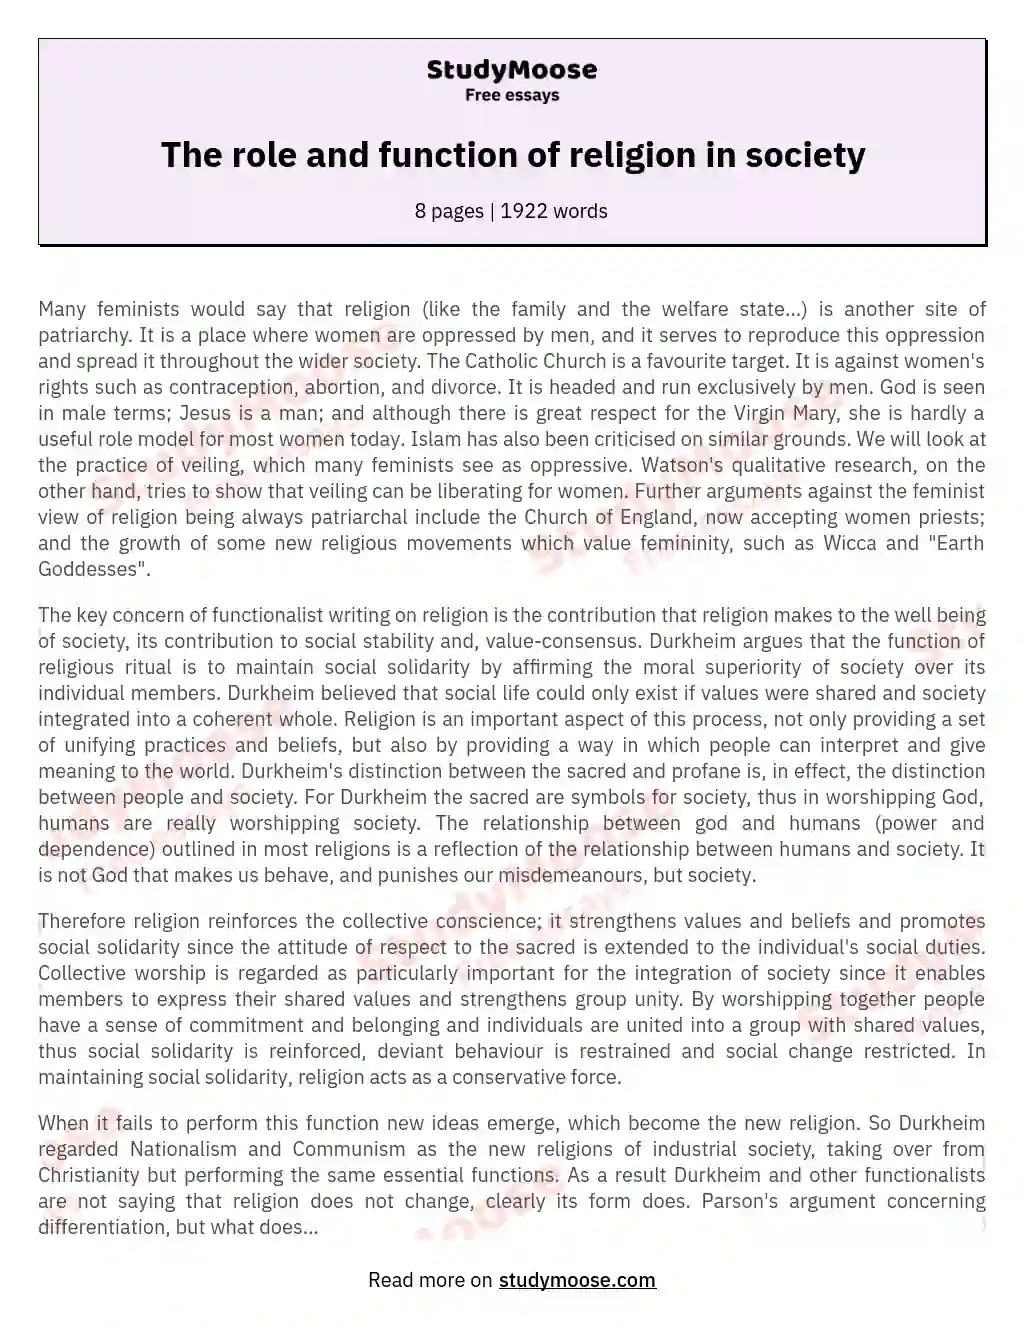 The role and function of religion in society essay